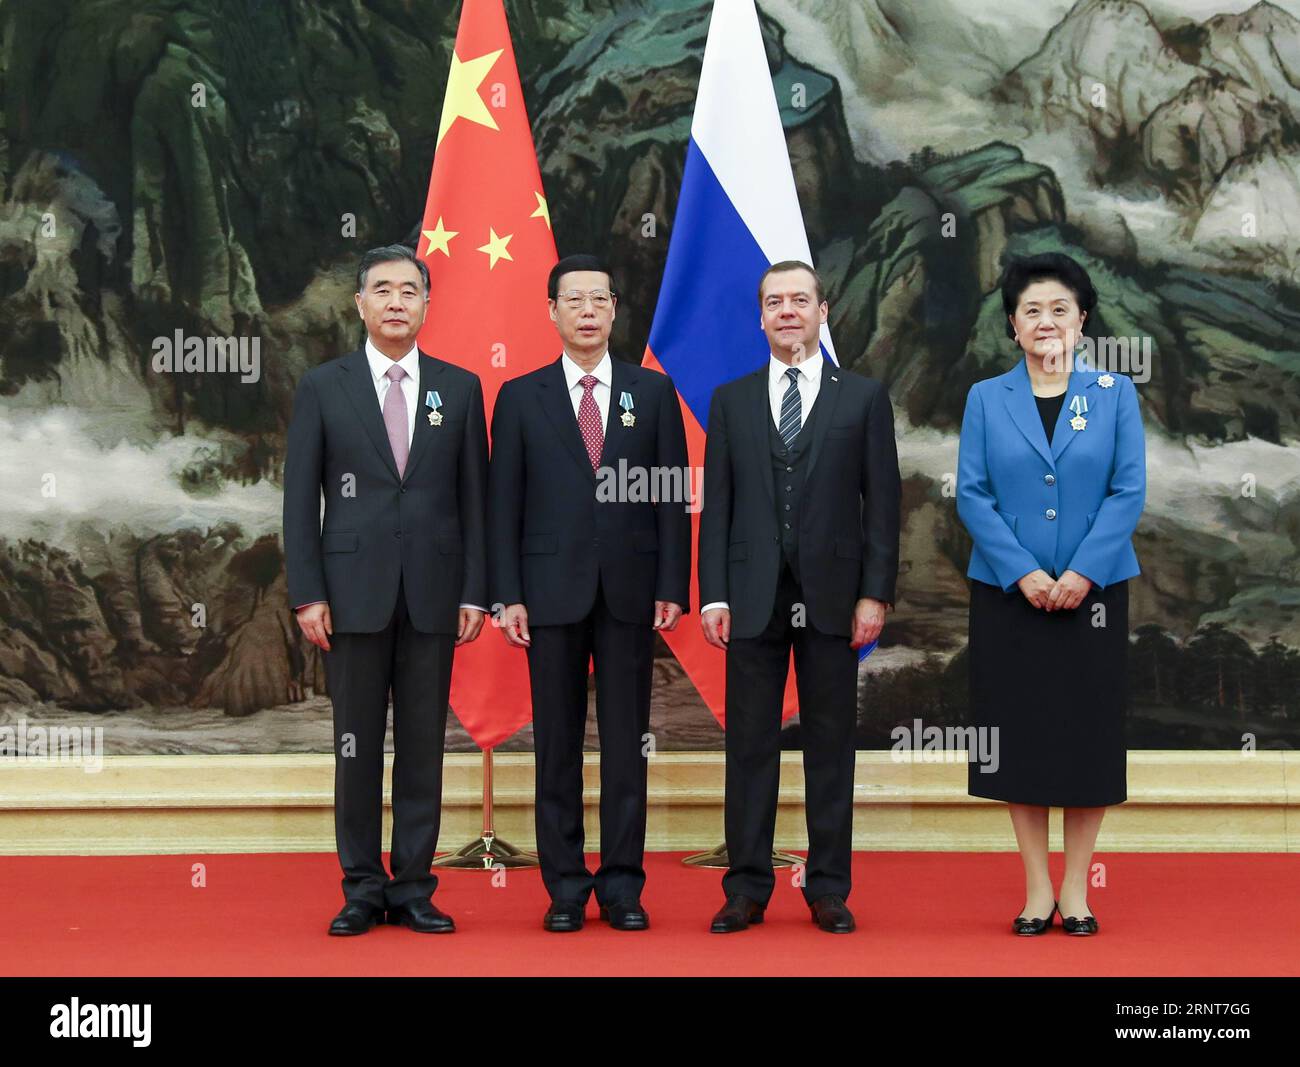 (171101) -- BEIJING, Nov. 1, 2017 -- Chinese Vice Premier Zhang Gaoli (2nd L), Vice Premier Wang Yang (1st L) who is also member of the Standing Committee of the Political Bureau of the Communist Party of China Central Committee and Vice Premier Liu Yandong (1st R) receive a Russian state award, the Order of Friendship, from Russian Prime Minister Dmitry Medvedev (2nd R) at the Great Hall of the People in Beijing, capital of China, Nov. 1, 2017. )(mcg) CHINA-RUSSIA-THE ORDER OF FRIENDSHIP (CN) XiexHuanchi PUBLICATIONxNOTxINxCHN Stock Photo